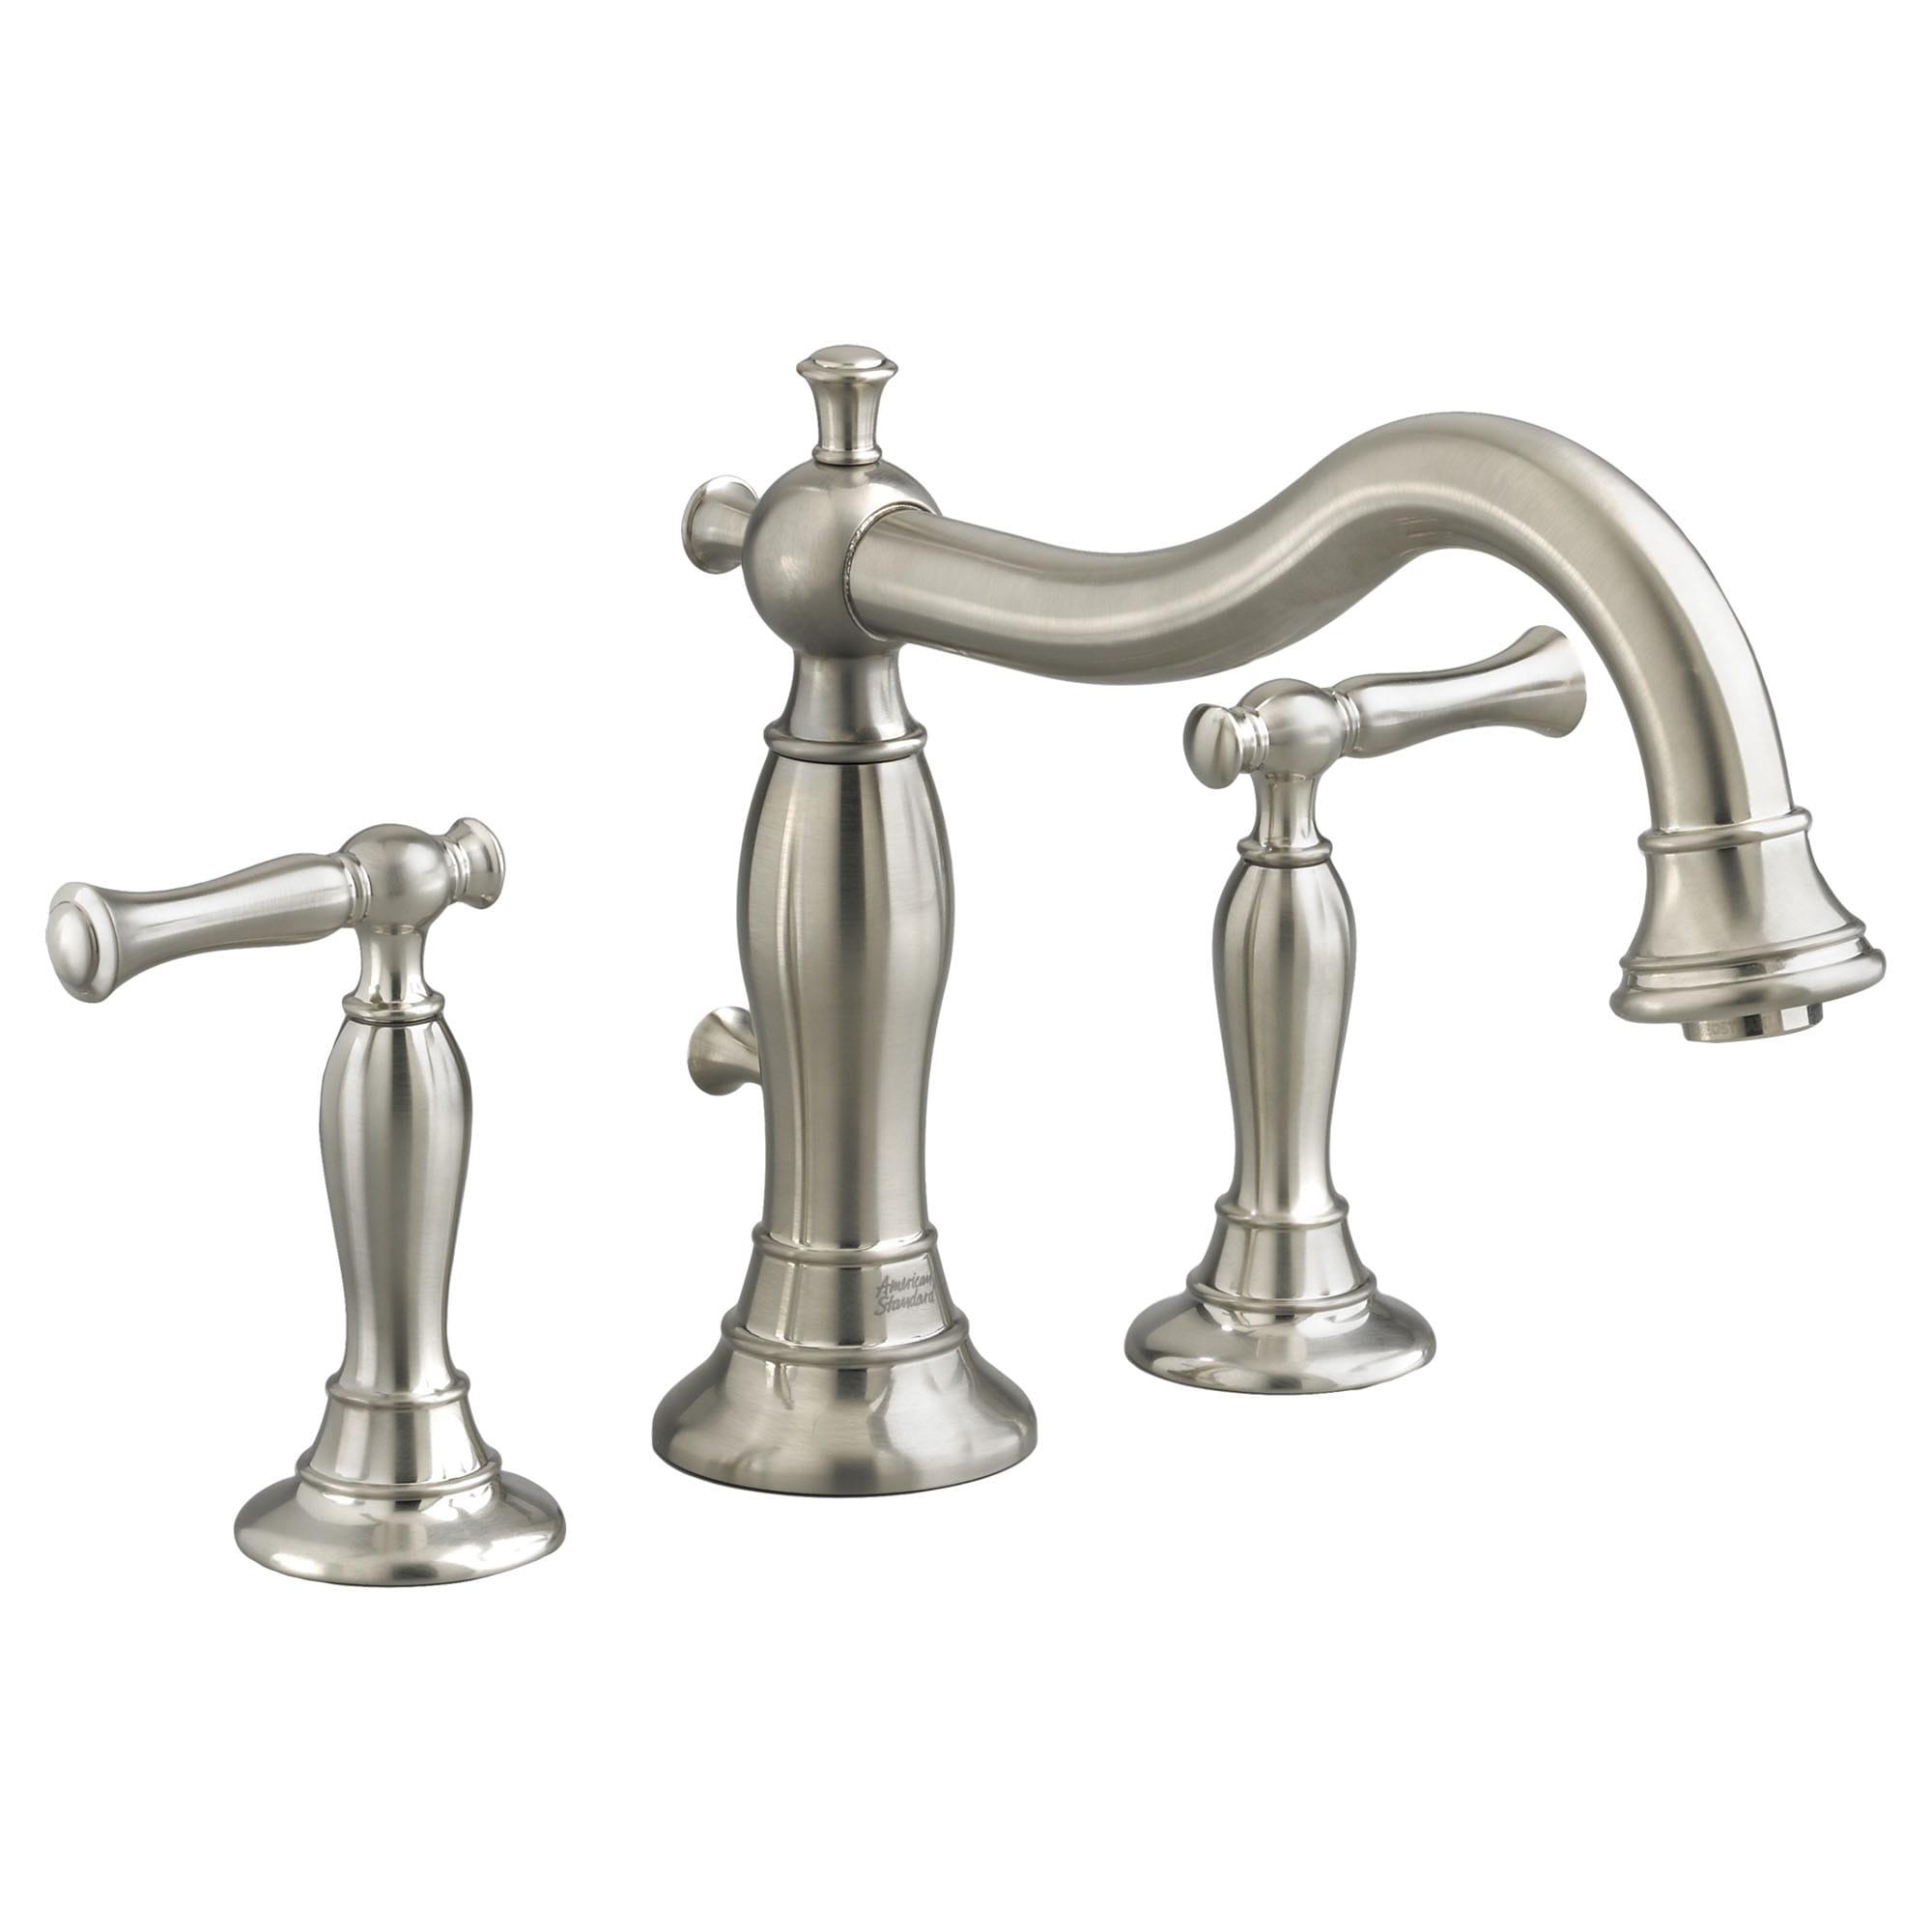 Quentin® Bathtub Faucet With Lever Handles for Flash® Rough-In Valve